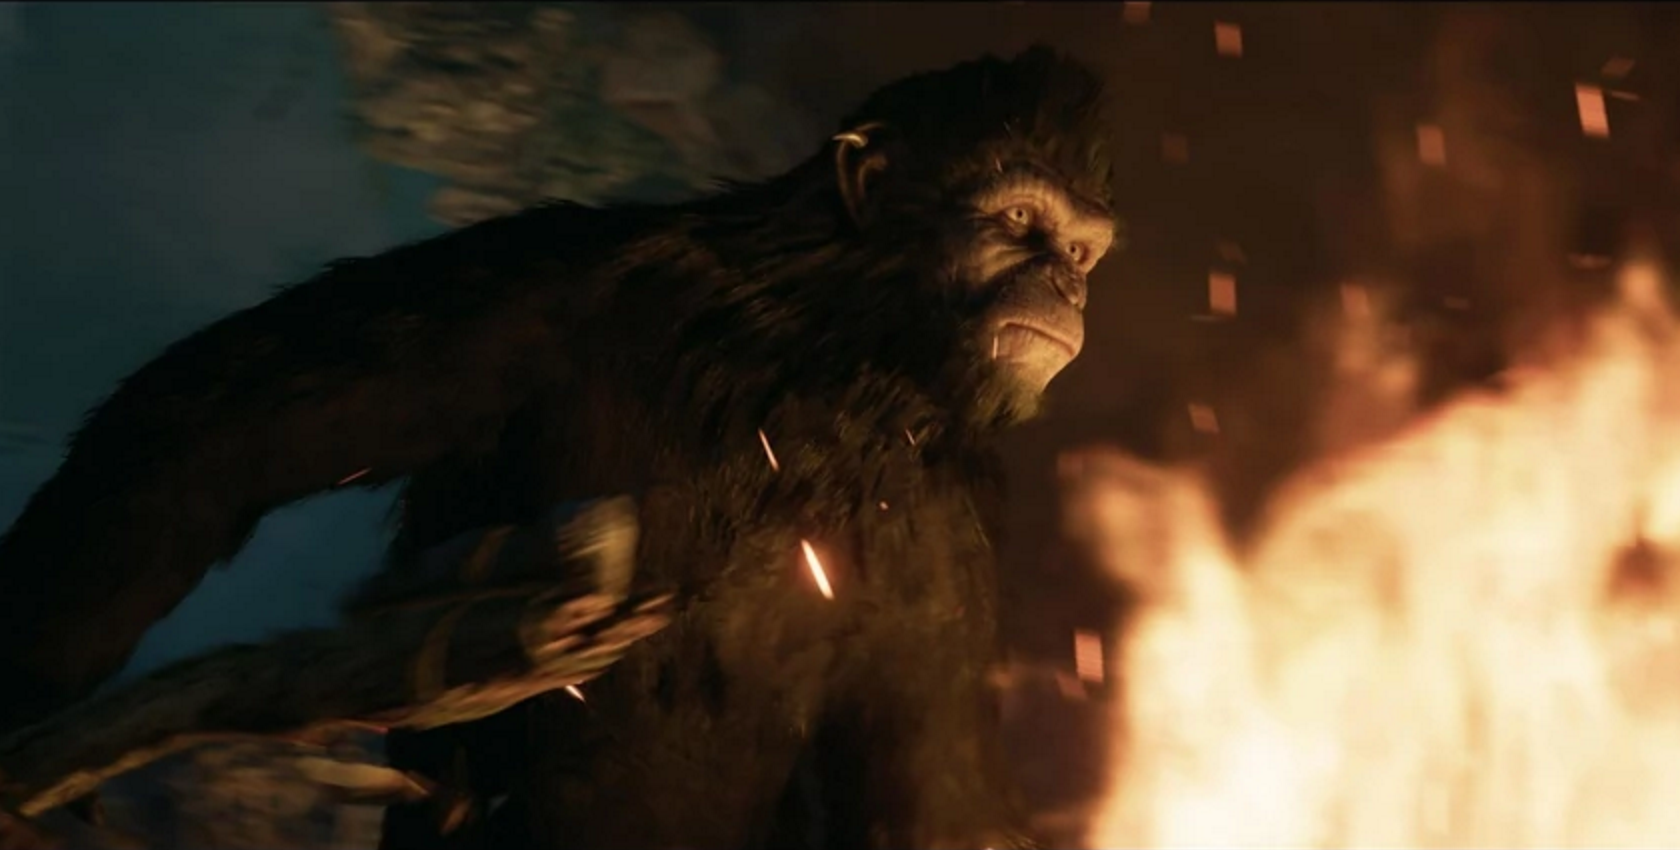 Планета обезьян игра. Planet of the Apes: last Frontier. Planet of the Apes - last Frontier ps4. Planet of the Apes 2001 игра.